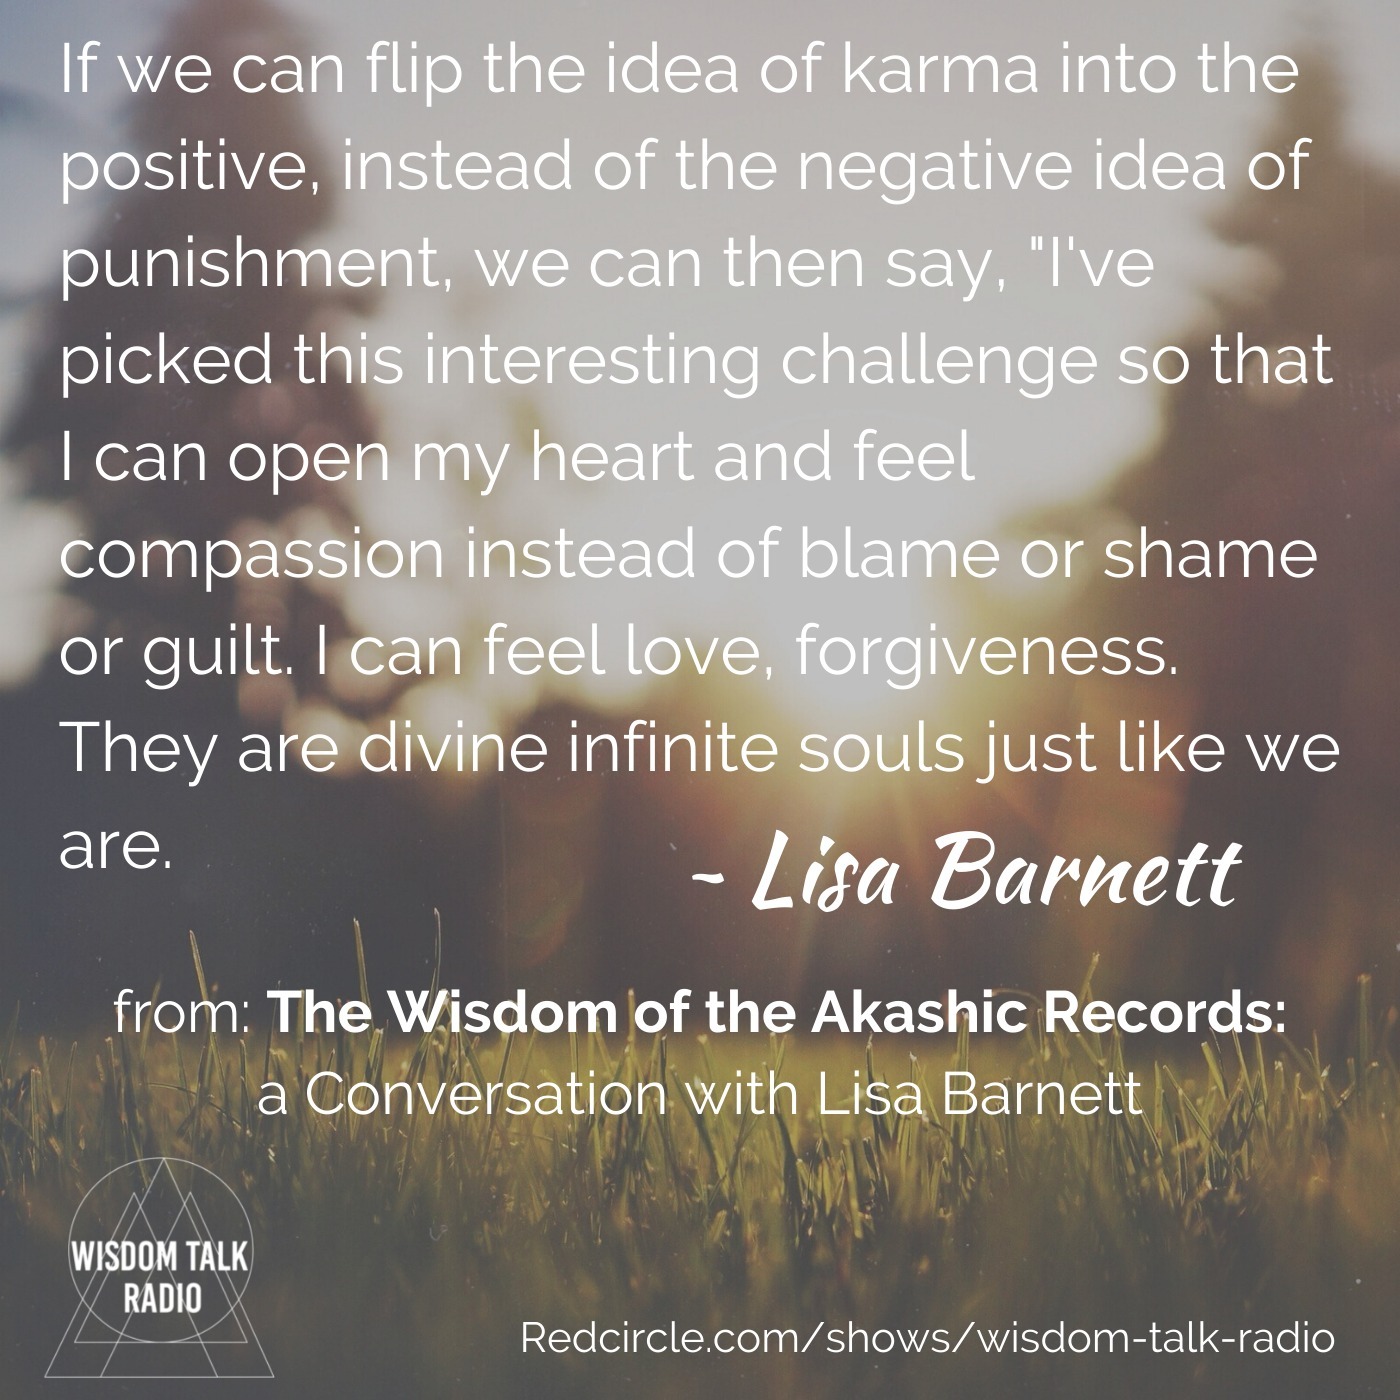 The Wisdom of the Akashic Records: a conversation with Lisa Barnett